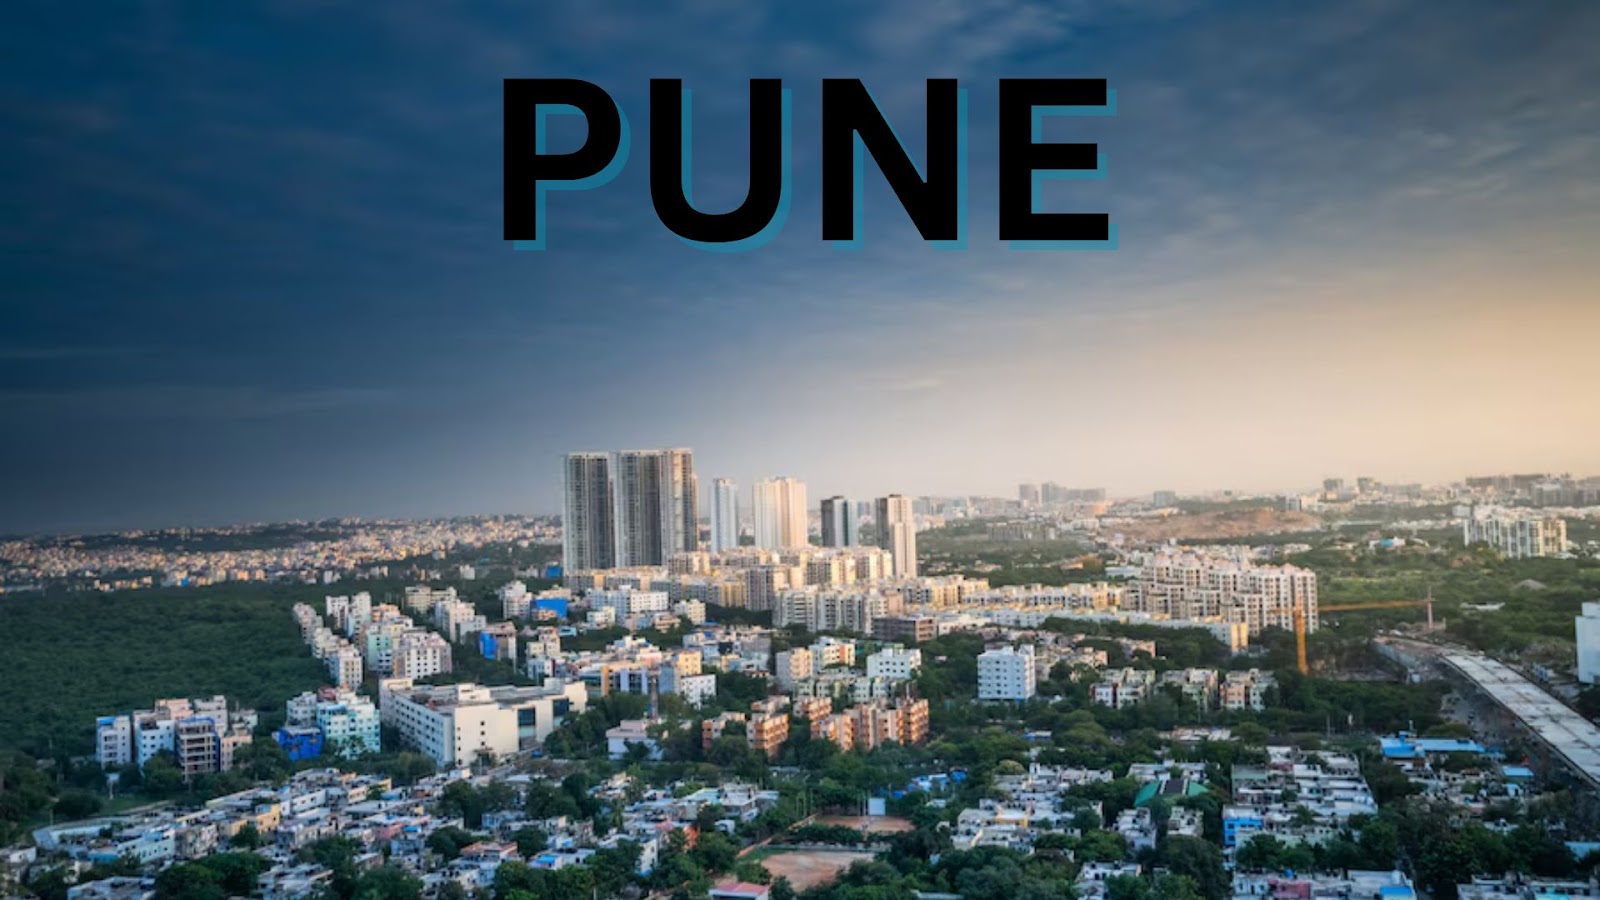 Pune is becoming one of the most metropolises and emerging cities in India